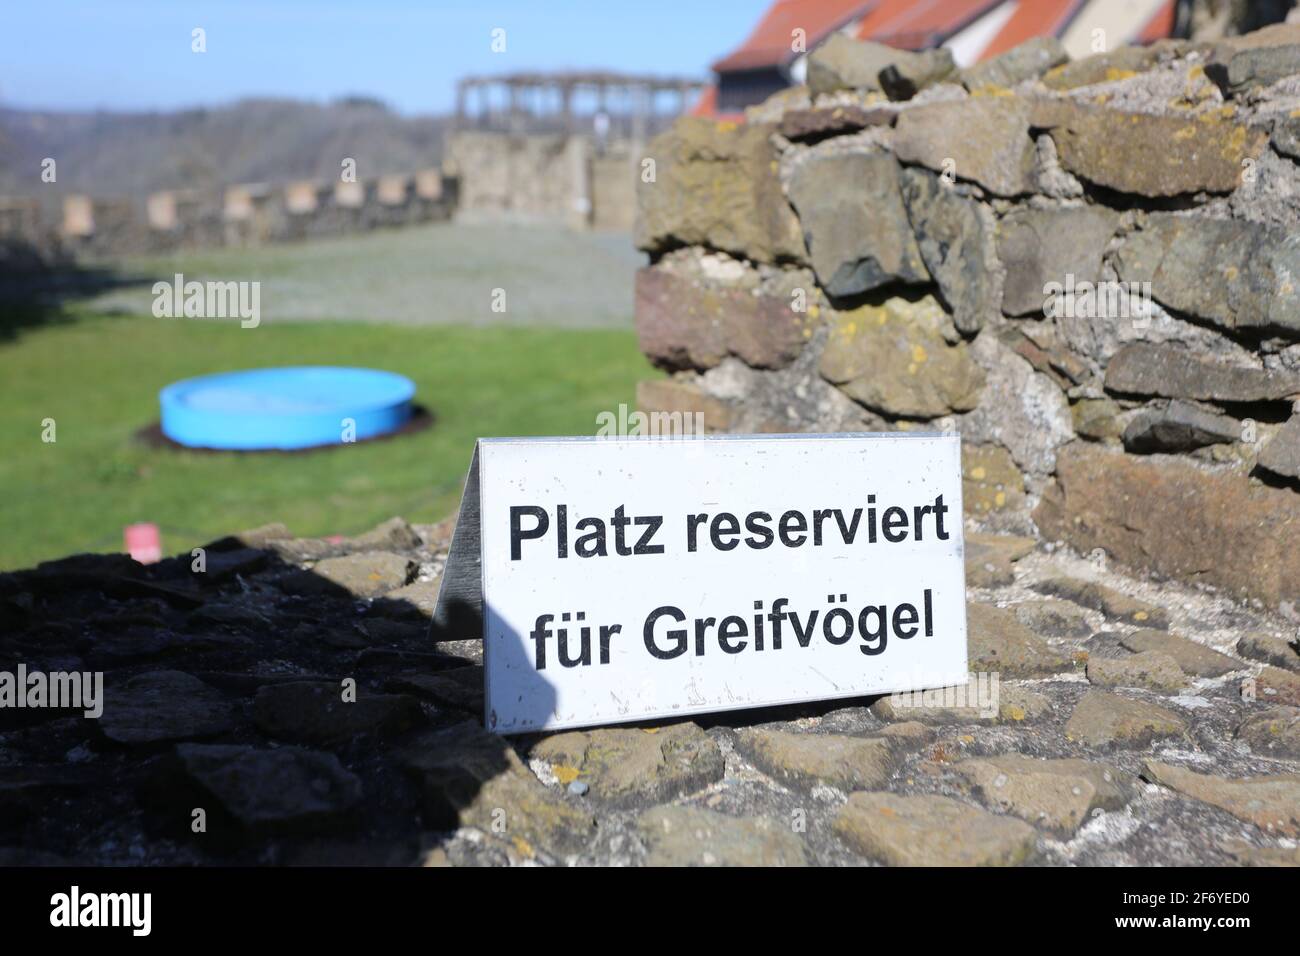 03 April 2021, Saxony-Anhalt, Pansfelde: A sign with the inscription Platz für Greifvögel, stands on a wall of the castle complex. Falkenstein Castle in the southern Harz region is open to visitors again for the first time after a long break due to the Corona pandemic. After booking by telephone, visitors can tour the castle grounds and experience a falconry demonstration. The castle is located above the Selketal. The fortified complex was built at the beginning of the 12th century and passed as a fiefdom to the noble Asseburg family in the 15th century. Photo: Matthias Bein/dpa-Zentralbild/dp Stock Photo